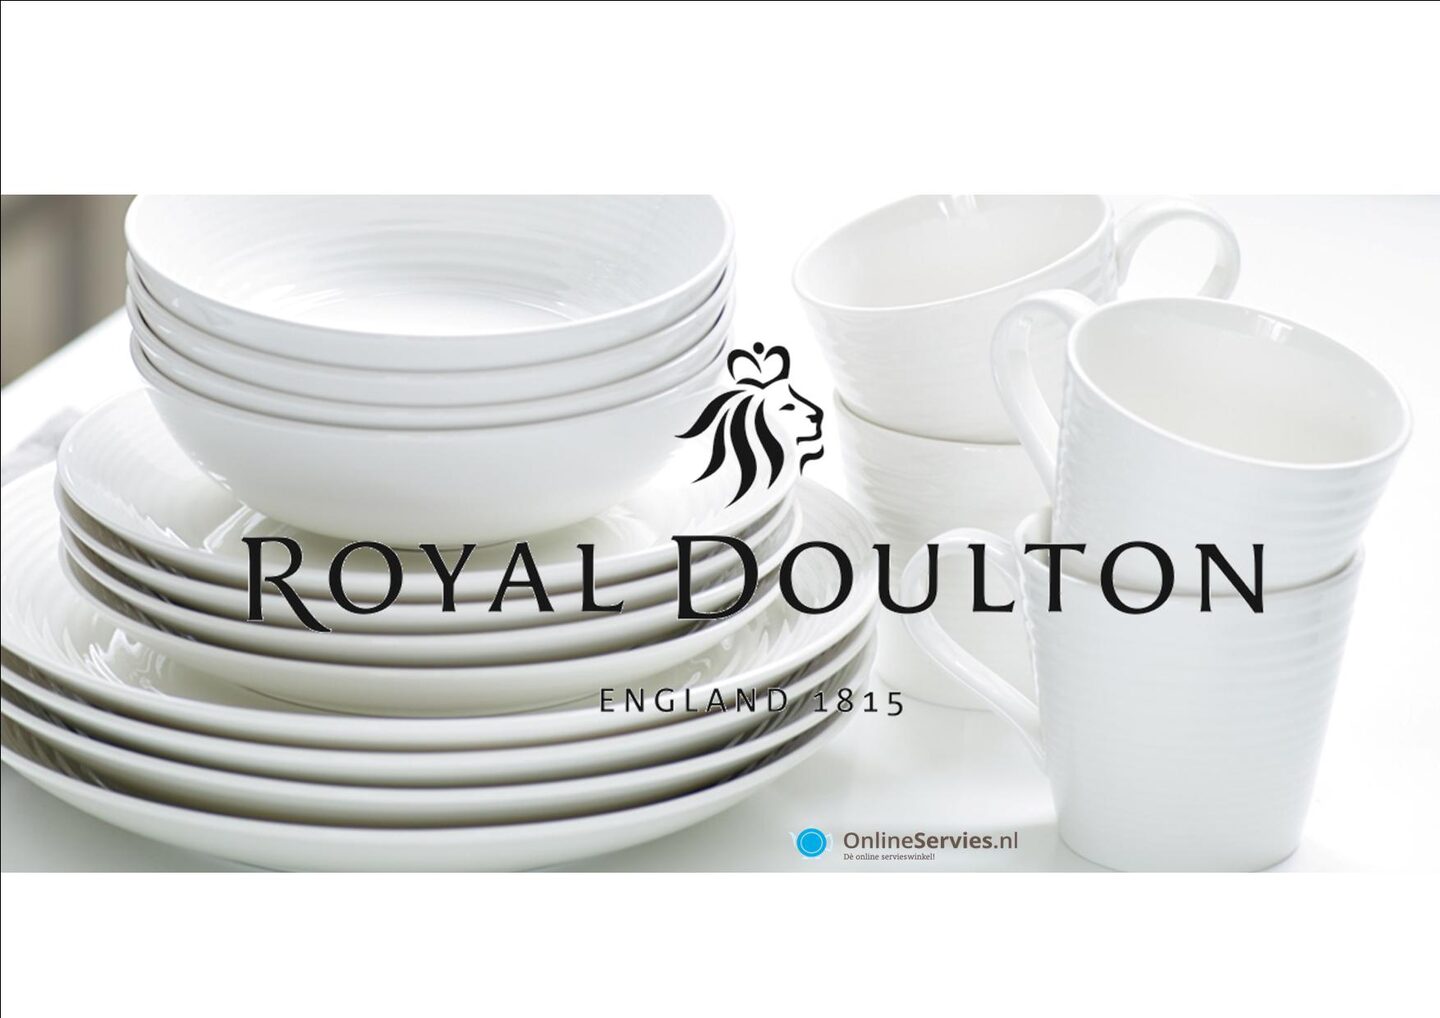 Royal Doulton servies OnlineServies, specialist